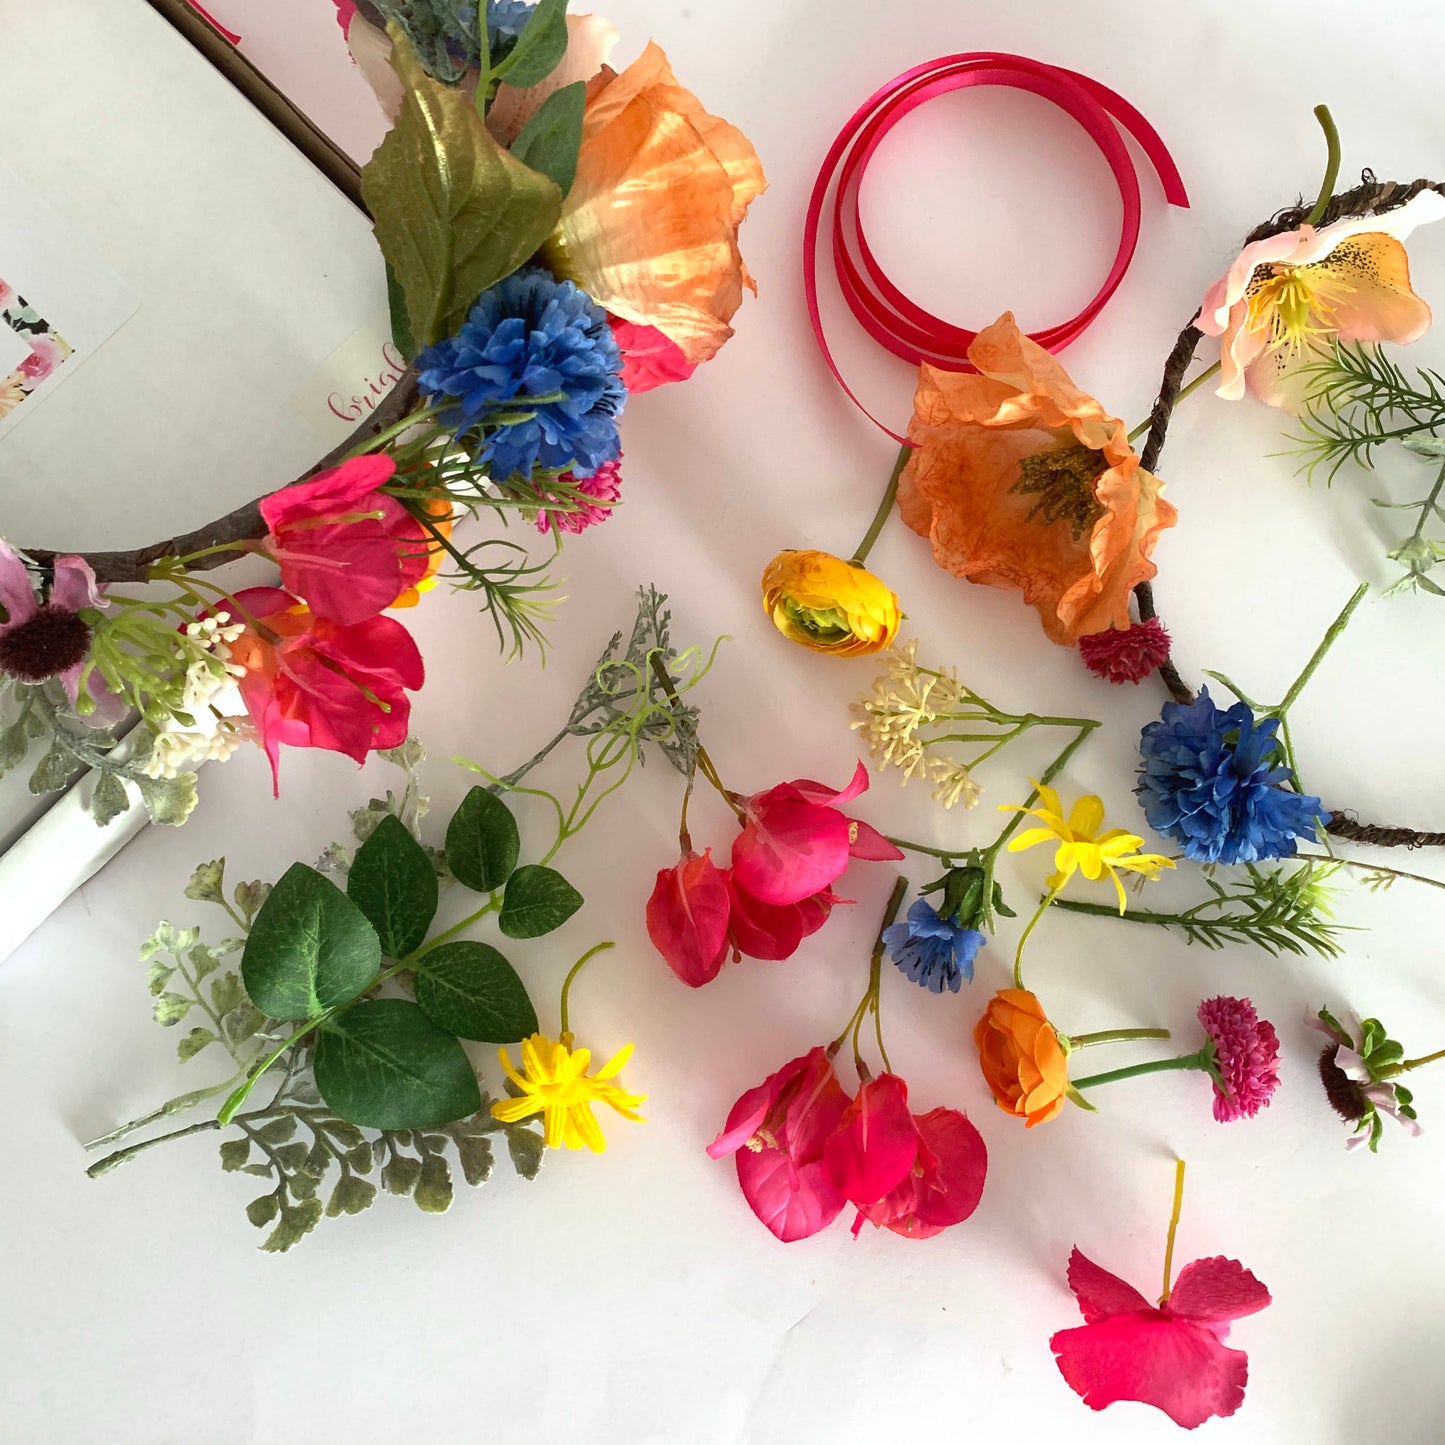 Yellow and Peach Flower Crown Kit, DIY Flower Crown, Make Your Own Crown,  Kid's Crown Activity, Bachelorette Party, Hen Party, DIY Wedding 